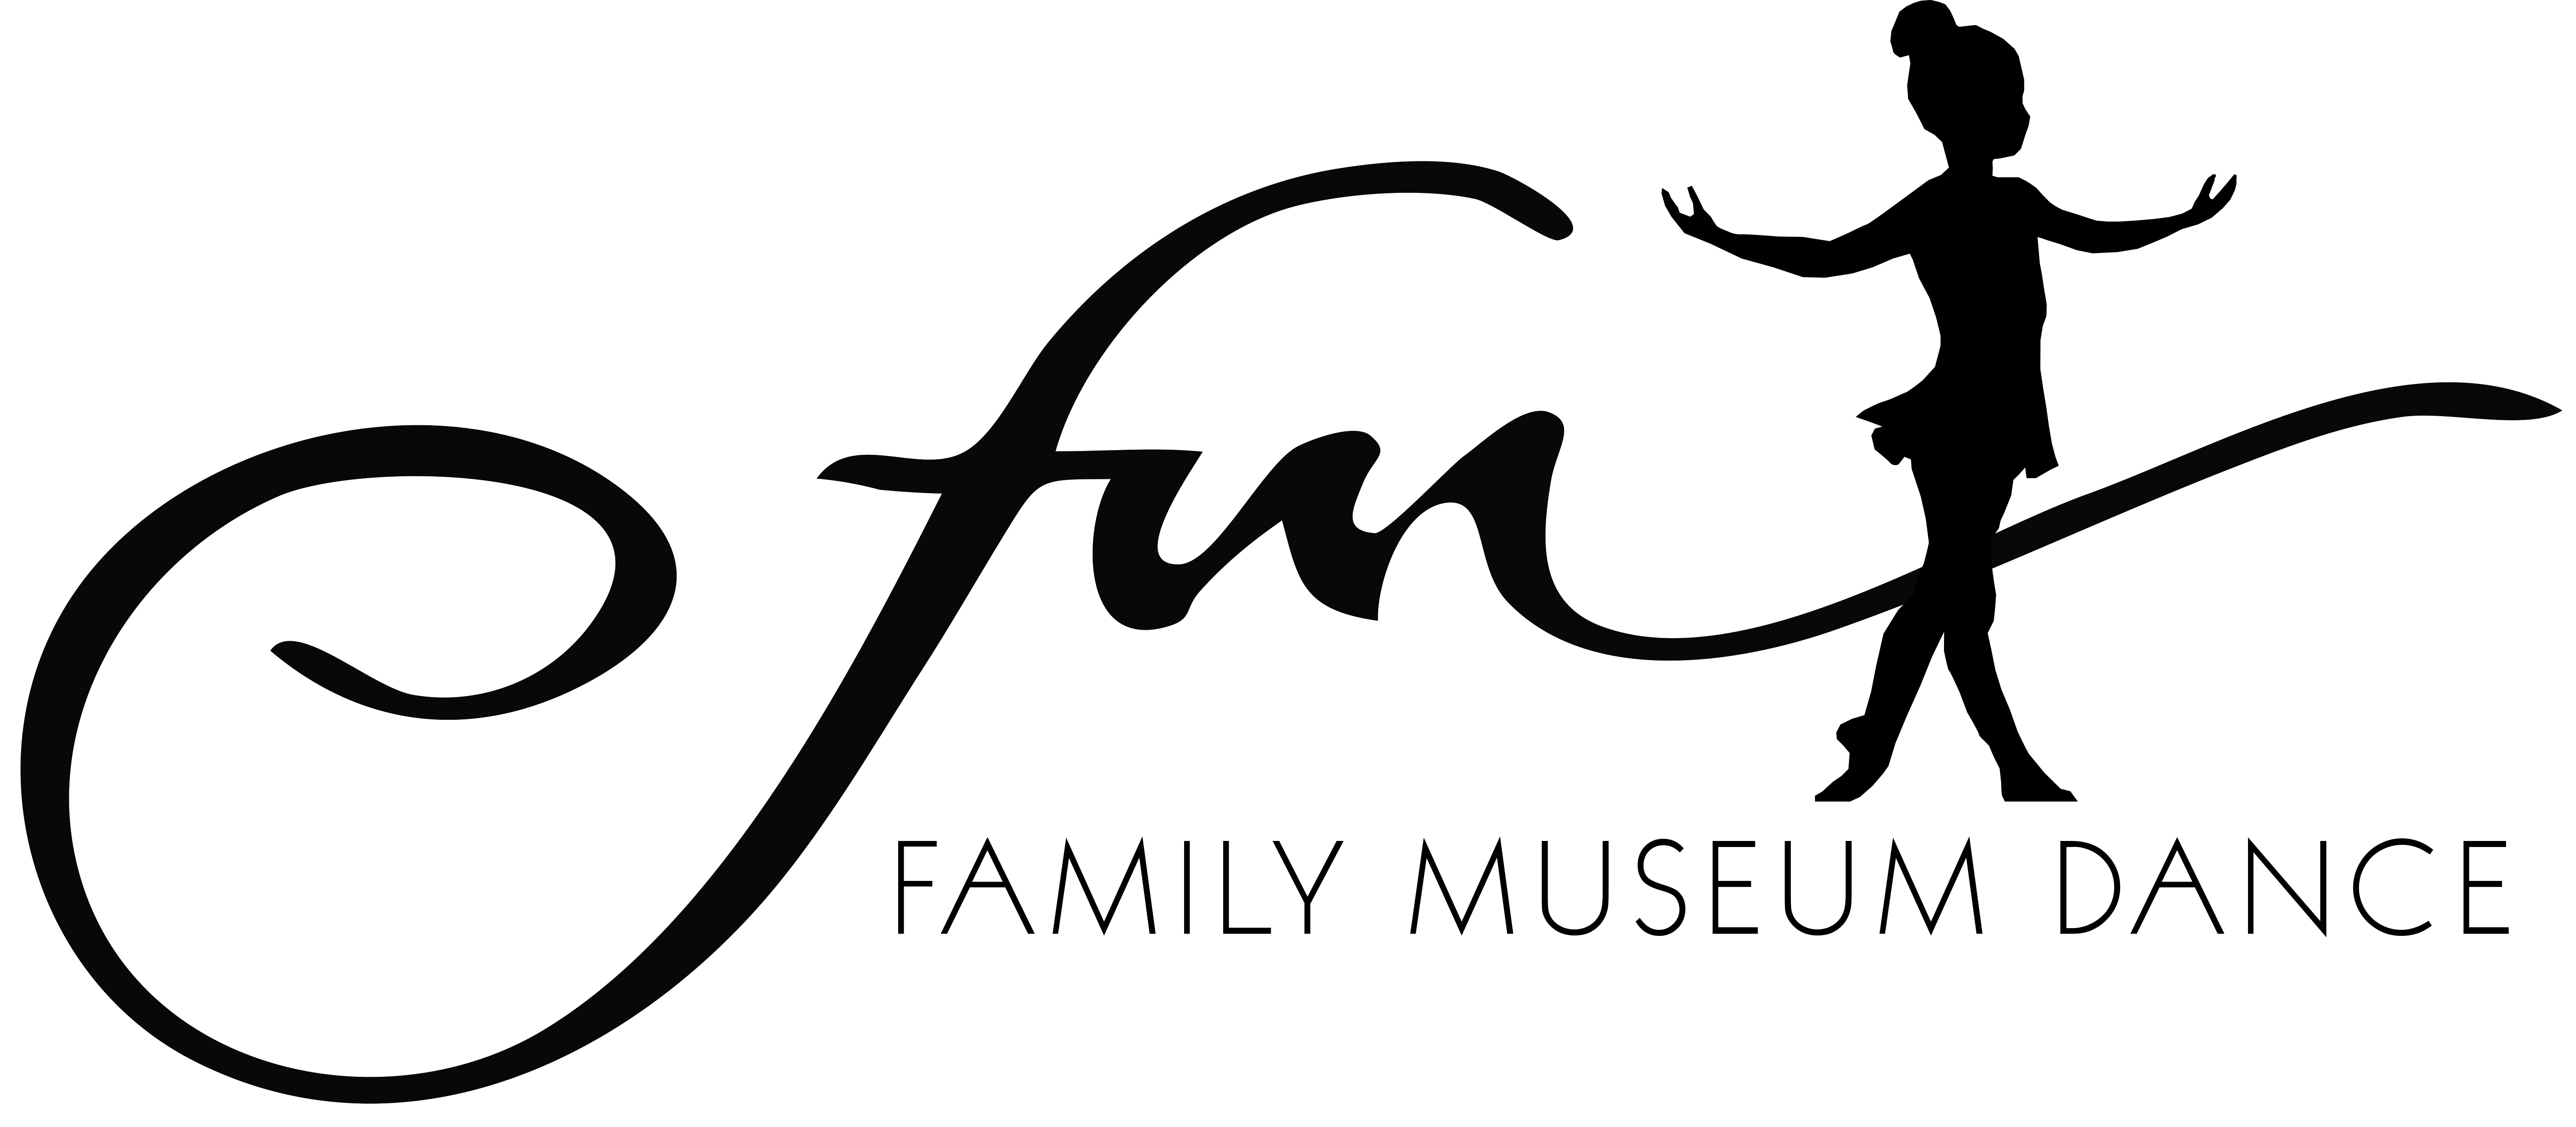 Family museum dance logo with dancer